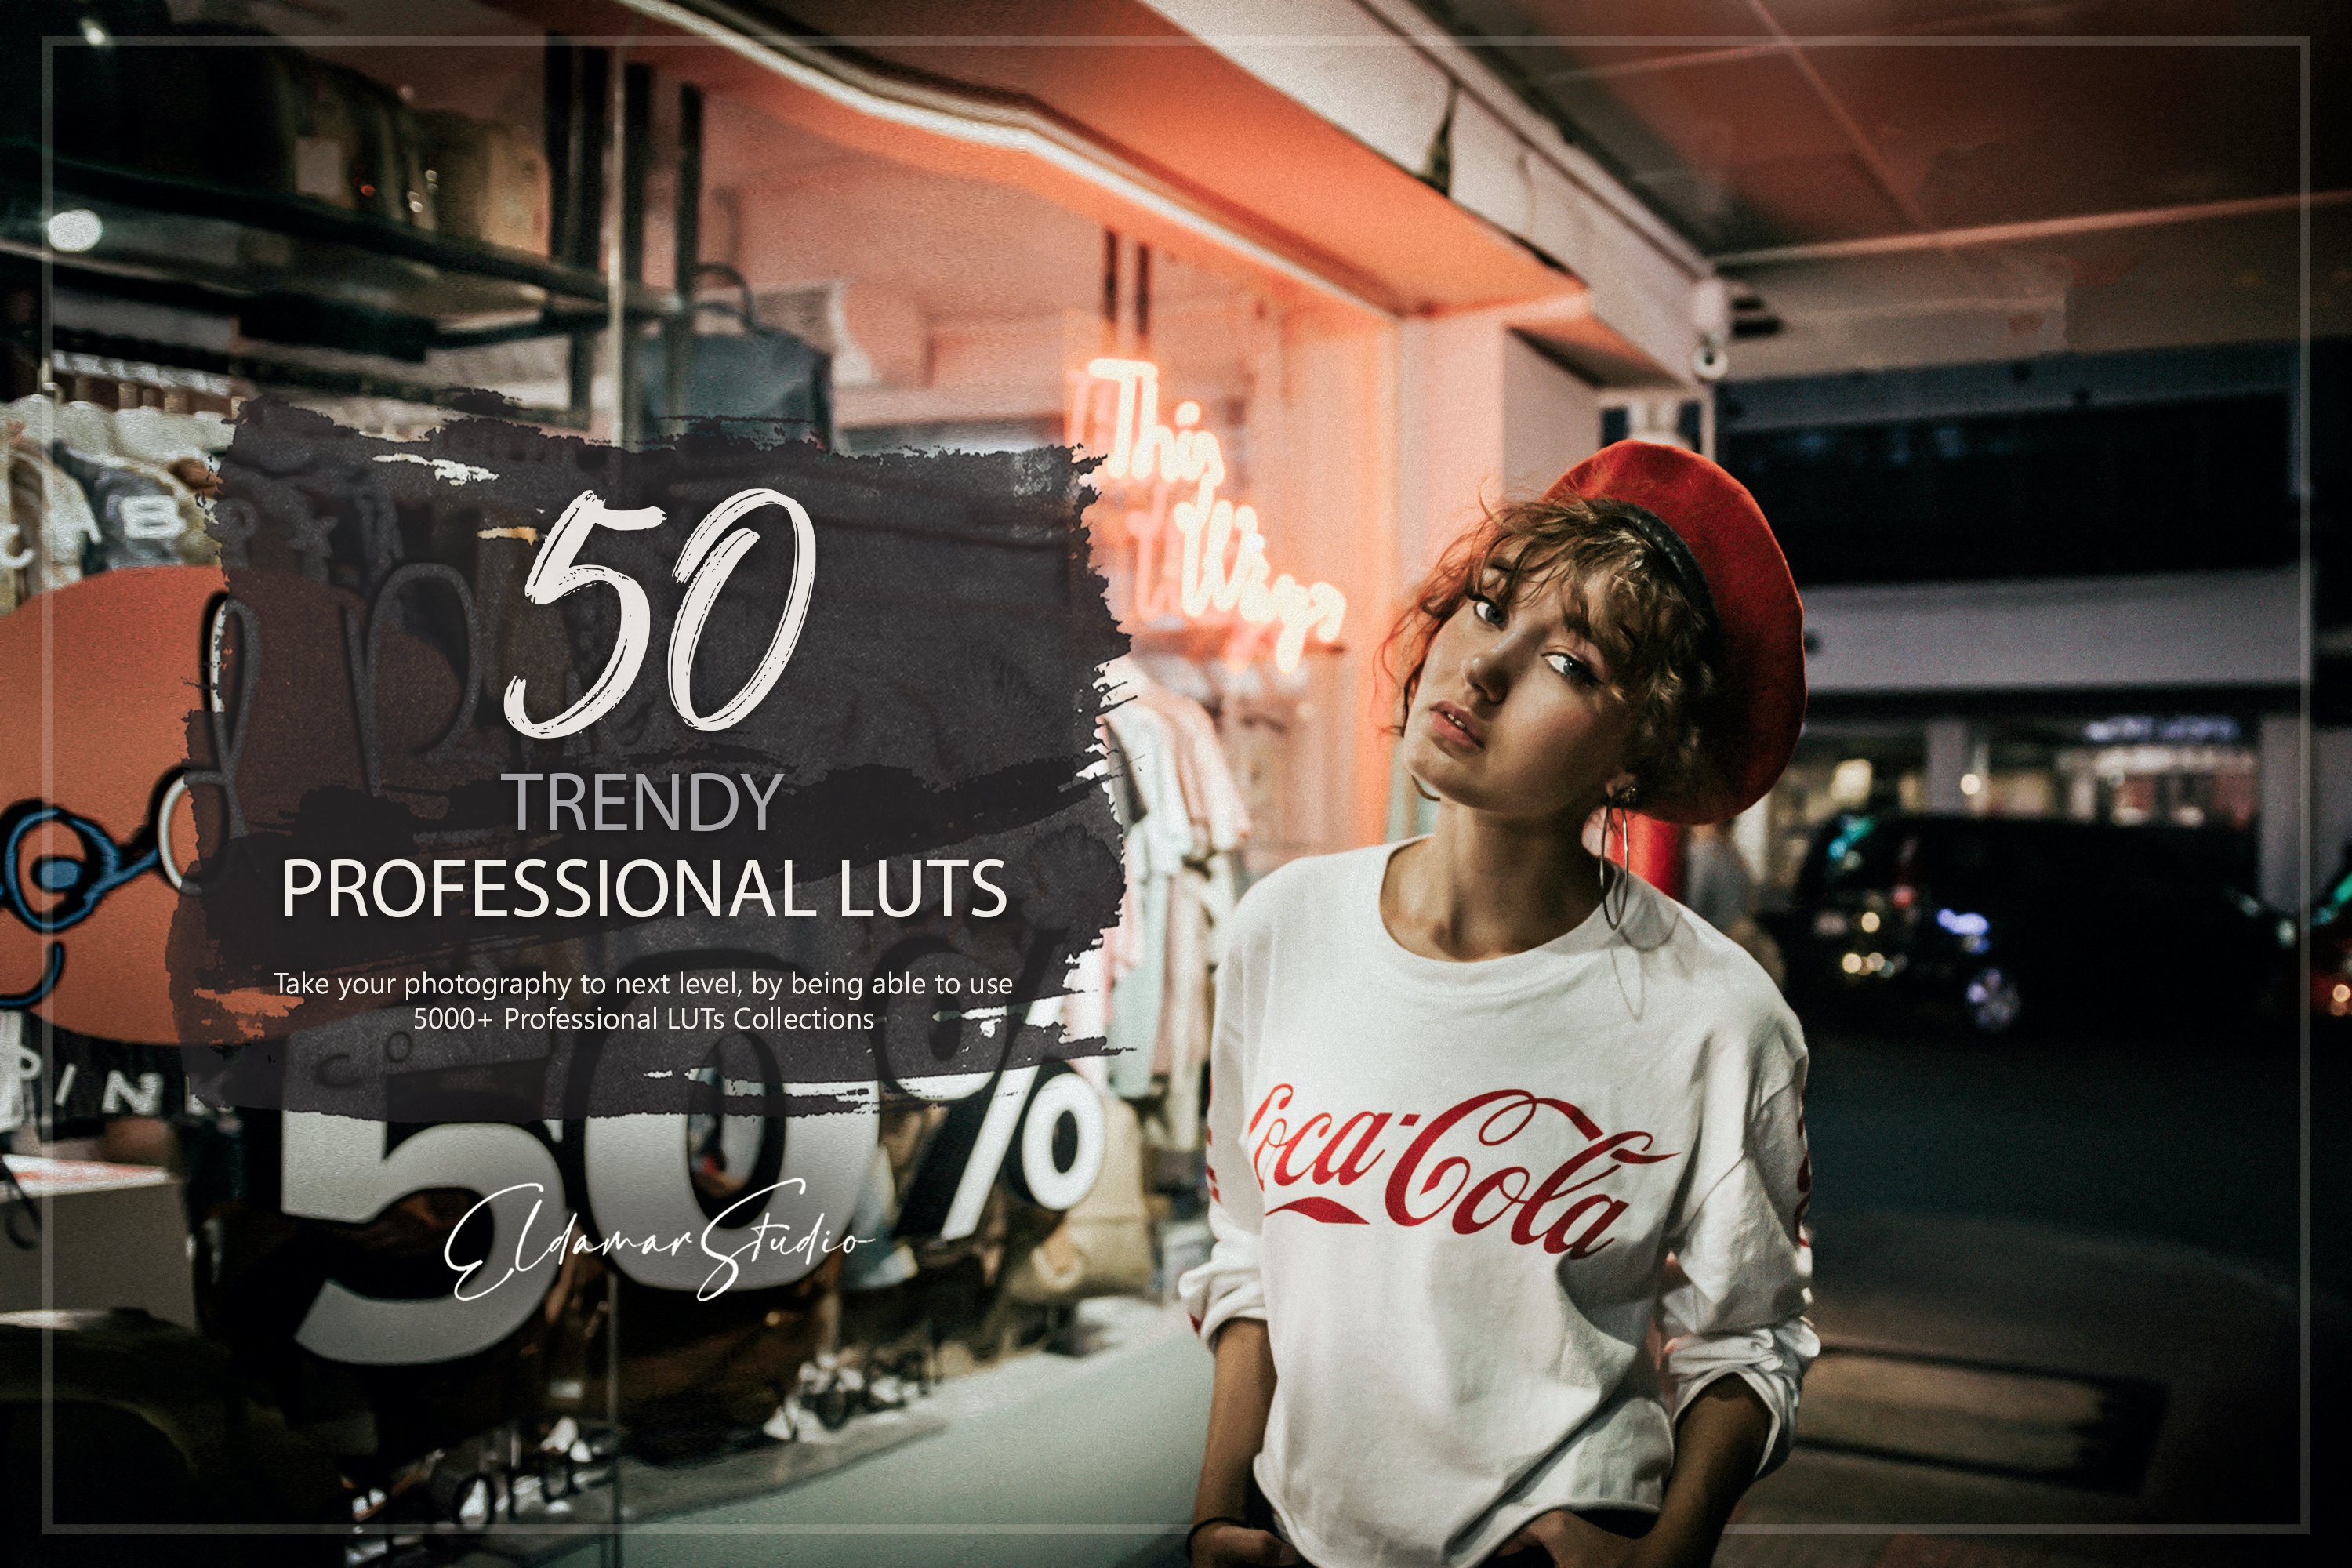 50 Trendy LUTs Packcover image.